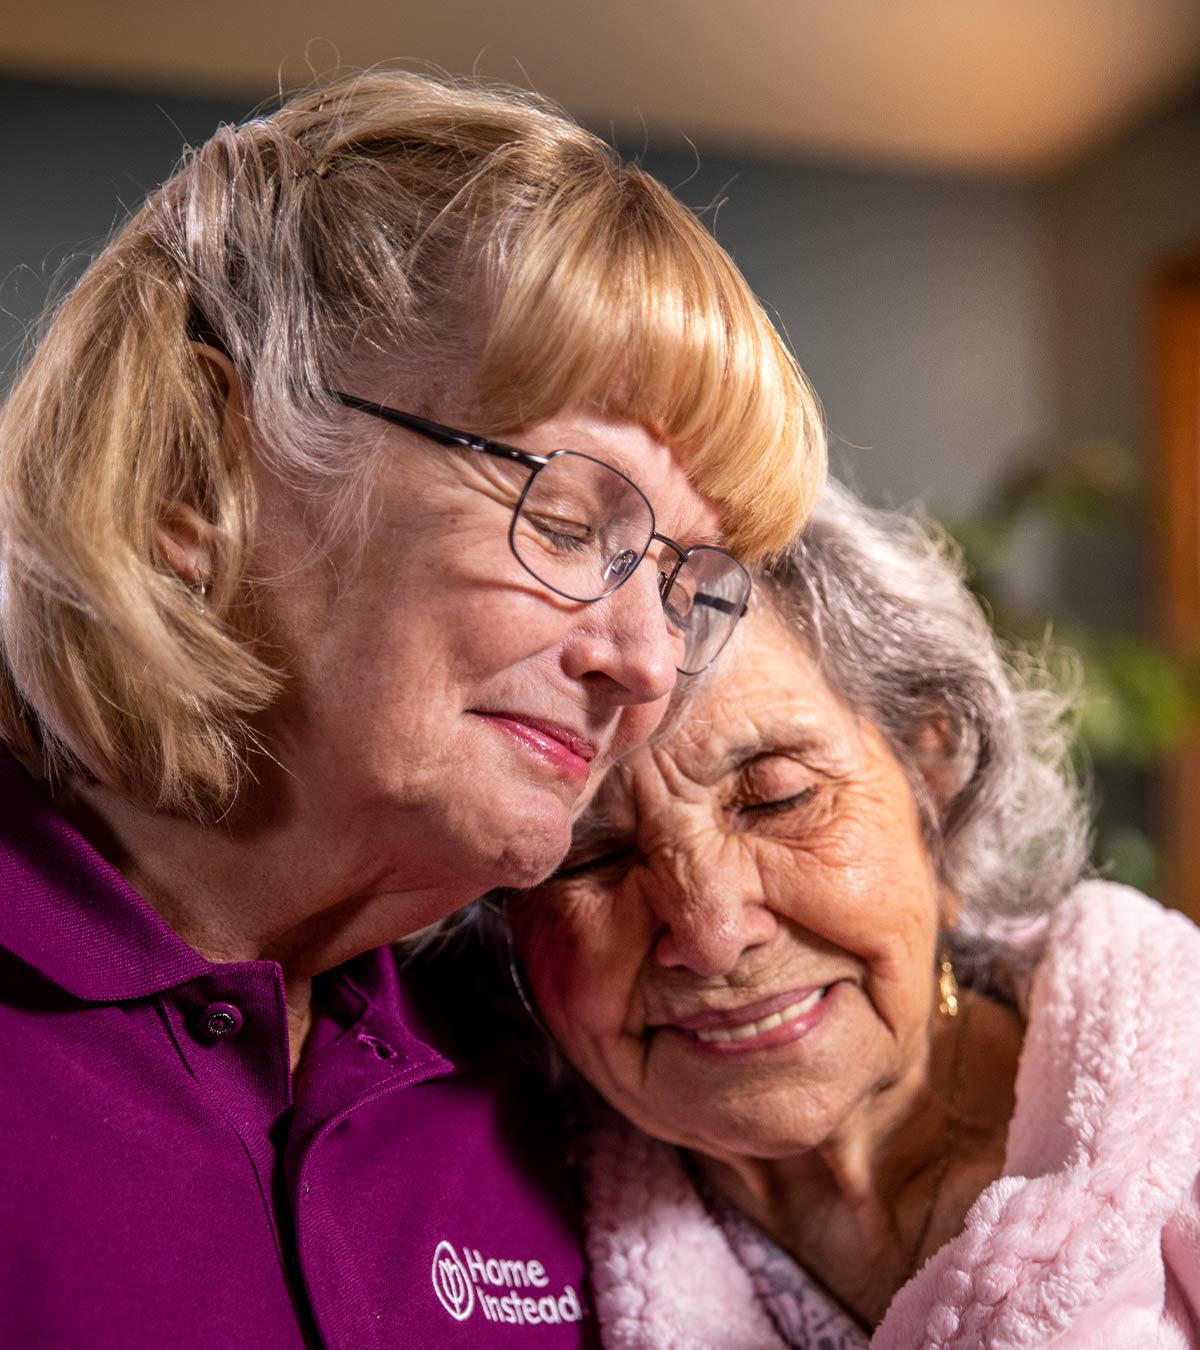 CAREGiver providing in-home senior care services. Home Instead of Shallotte, NC provides Elder Care to aging adults. 